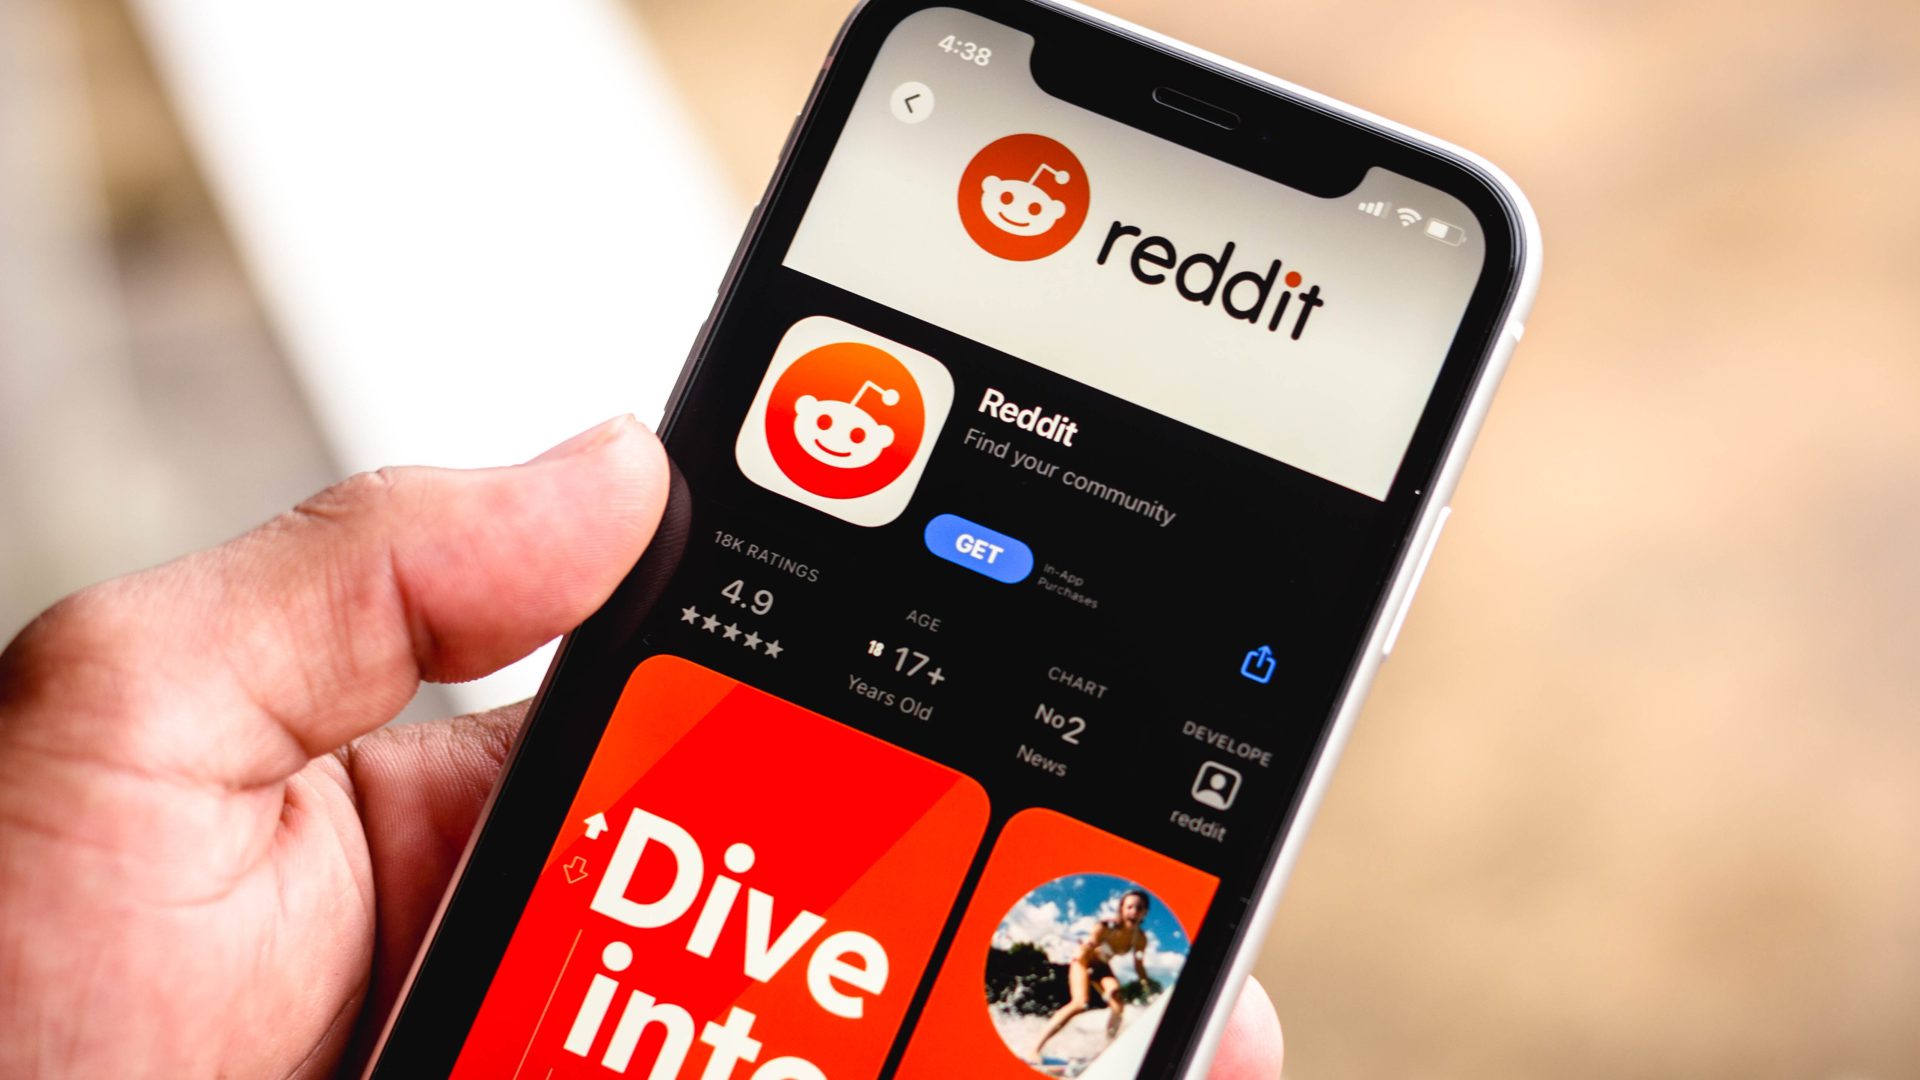 A hand holding a phone and showing reddit application